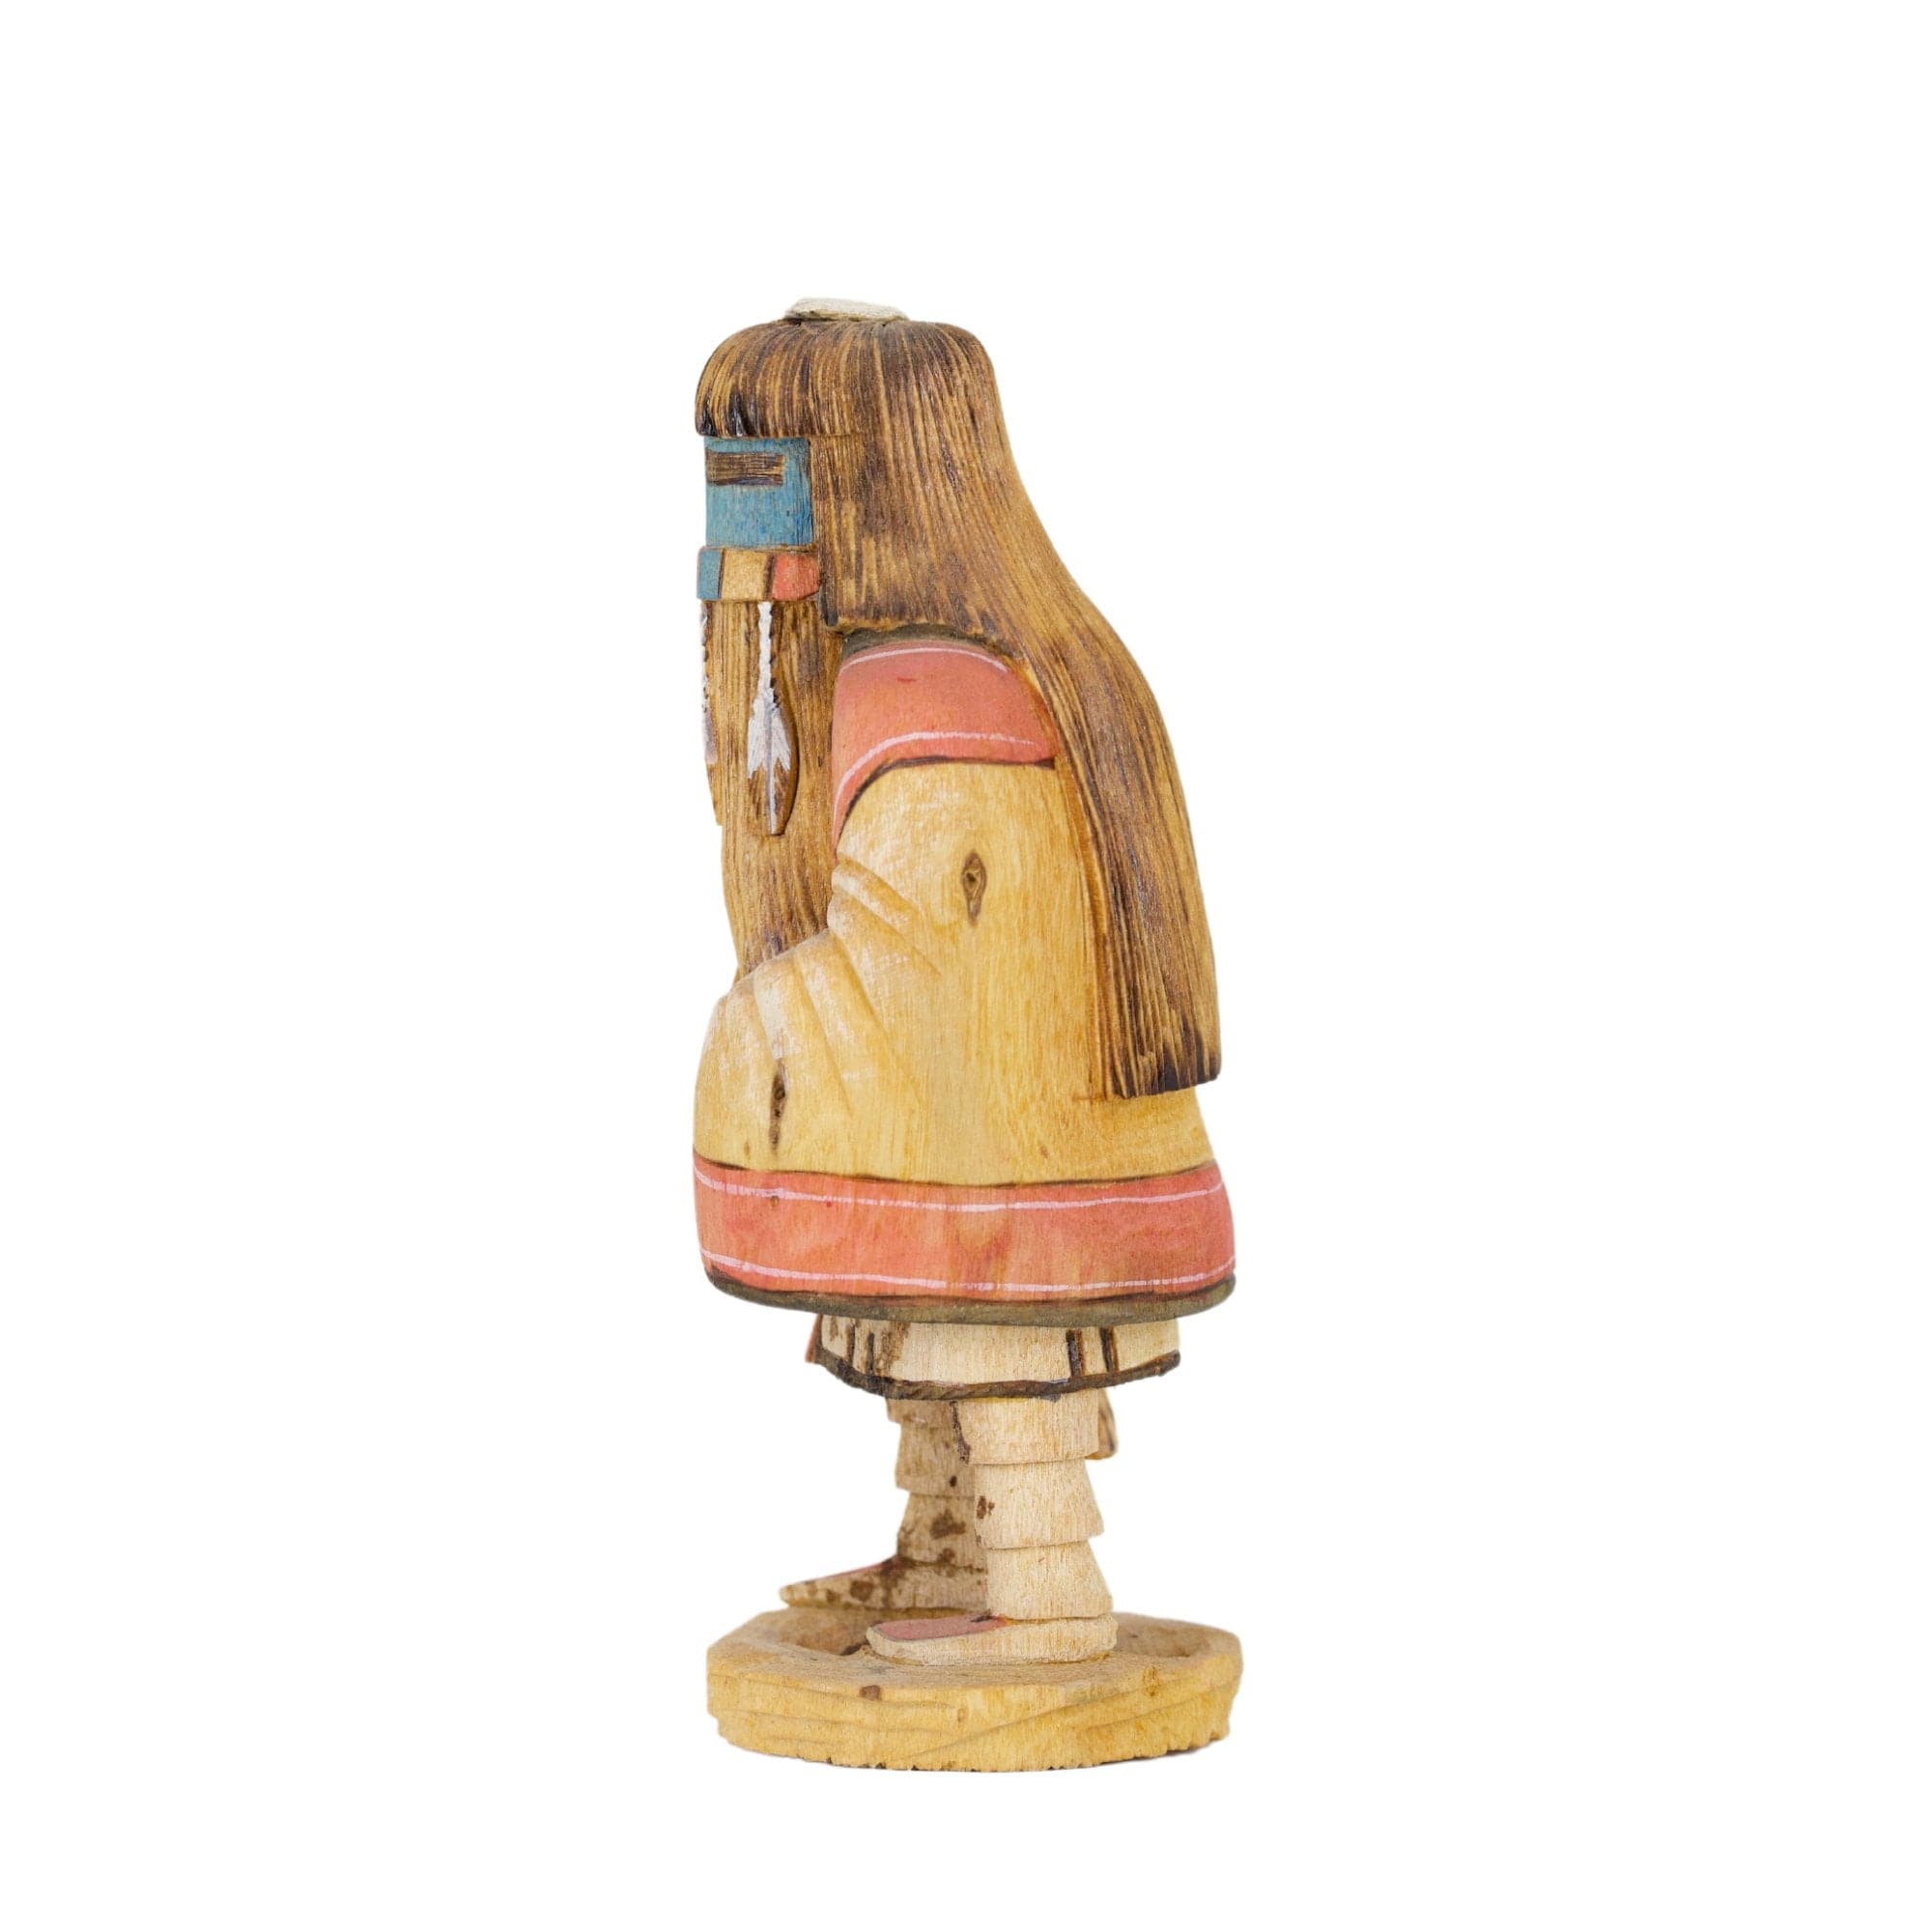 Intricately Detailed Wooden Native American Statue